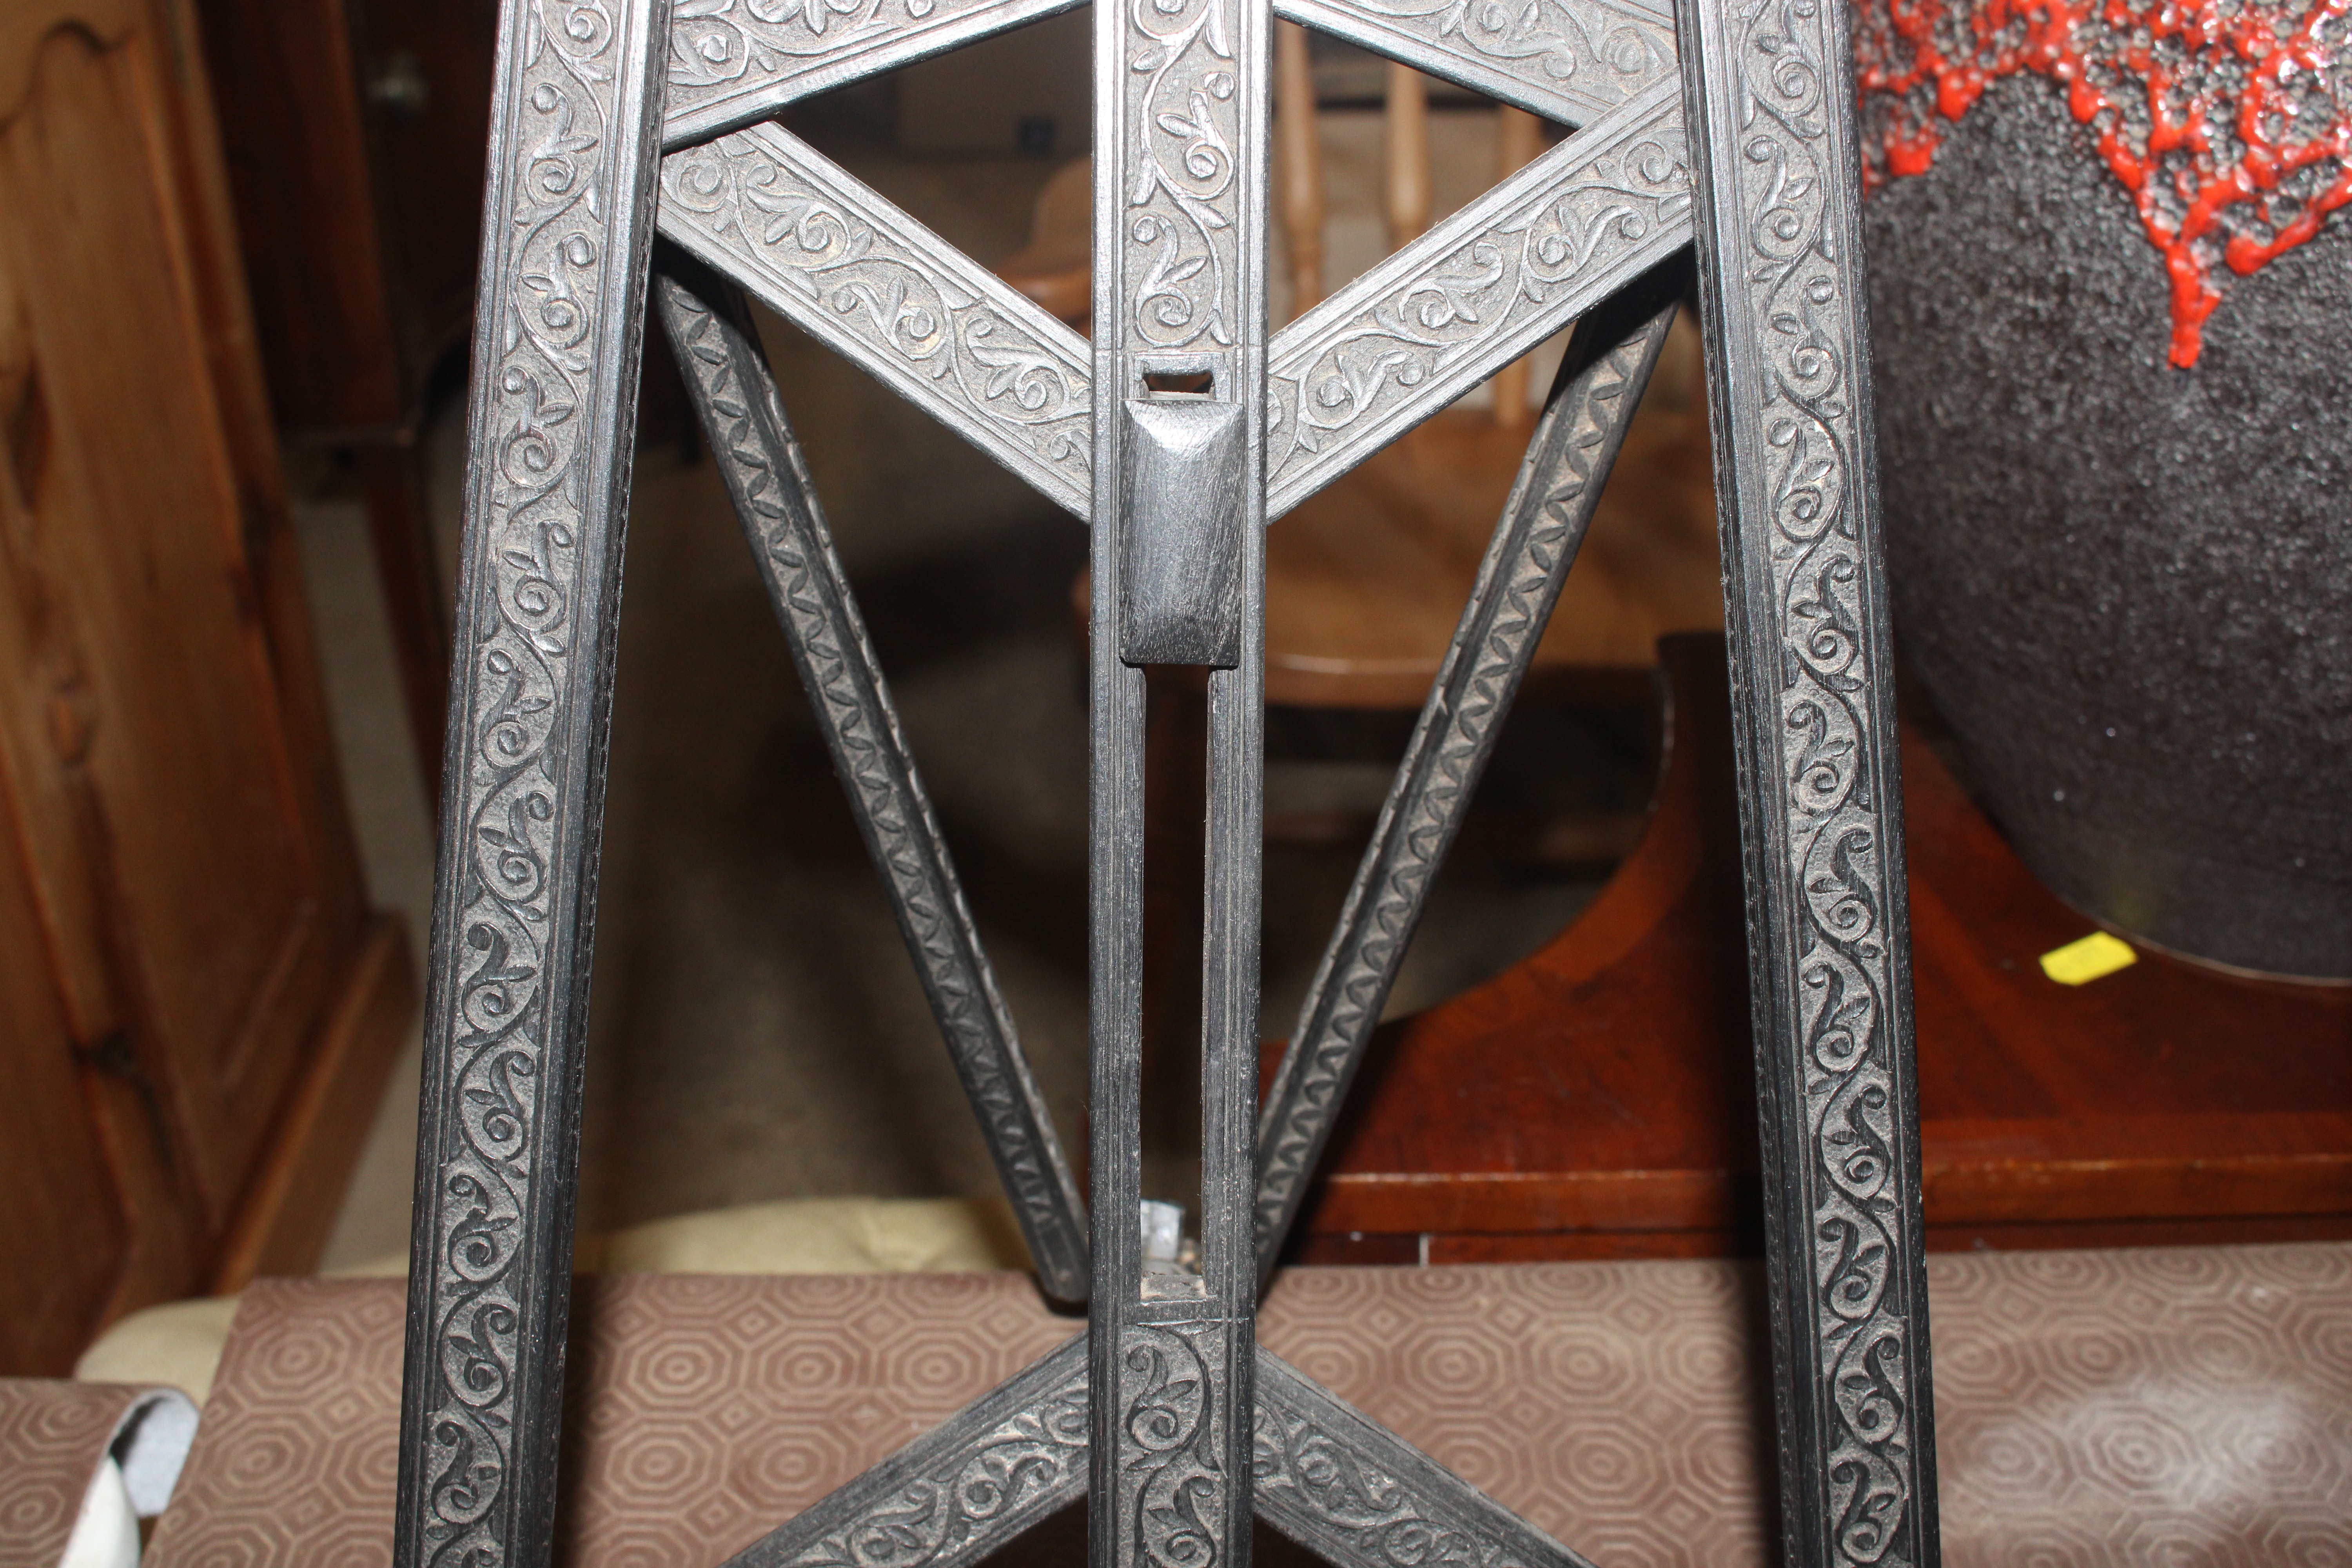 Two carved ebony music stands - Image 6 of 7